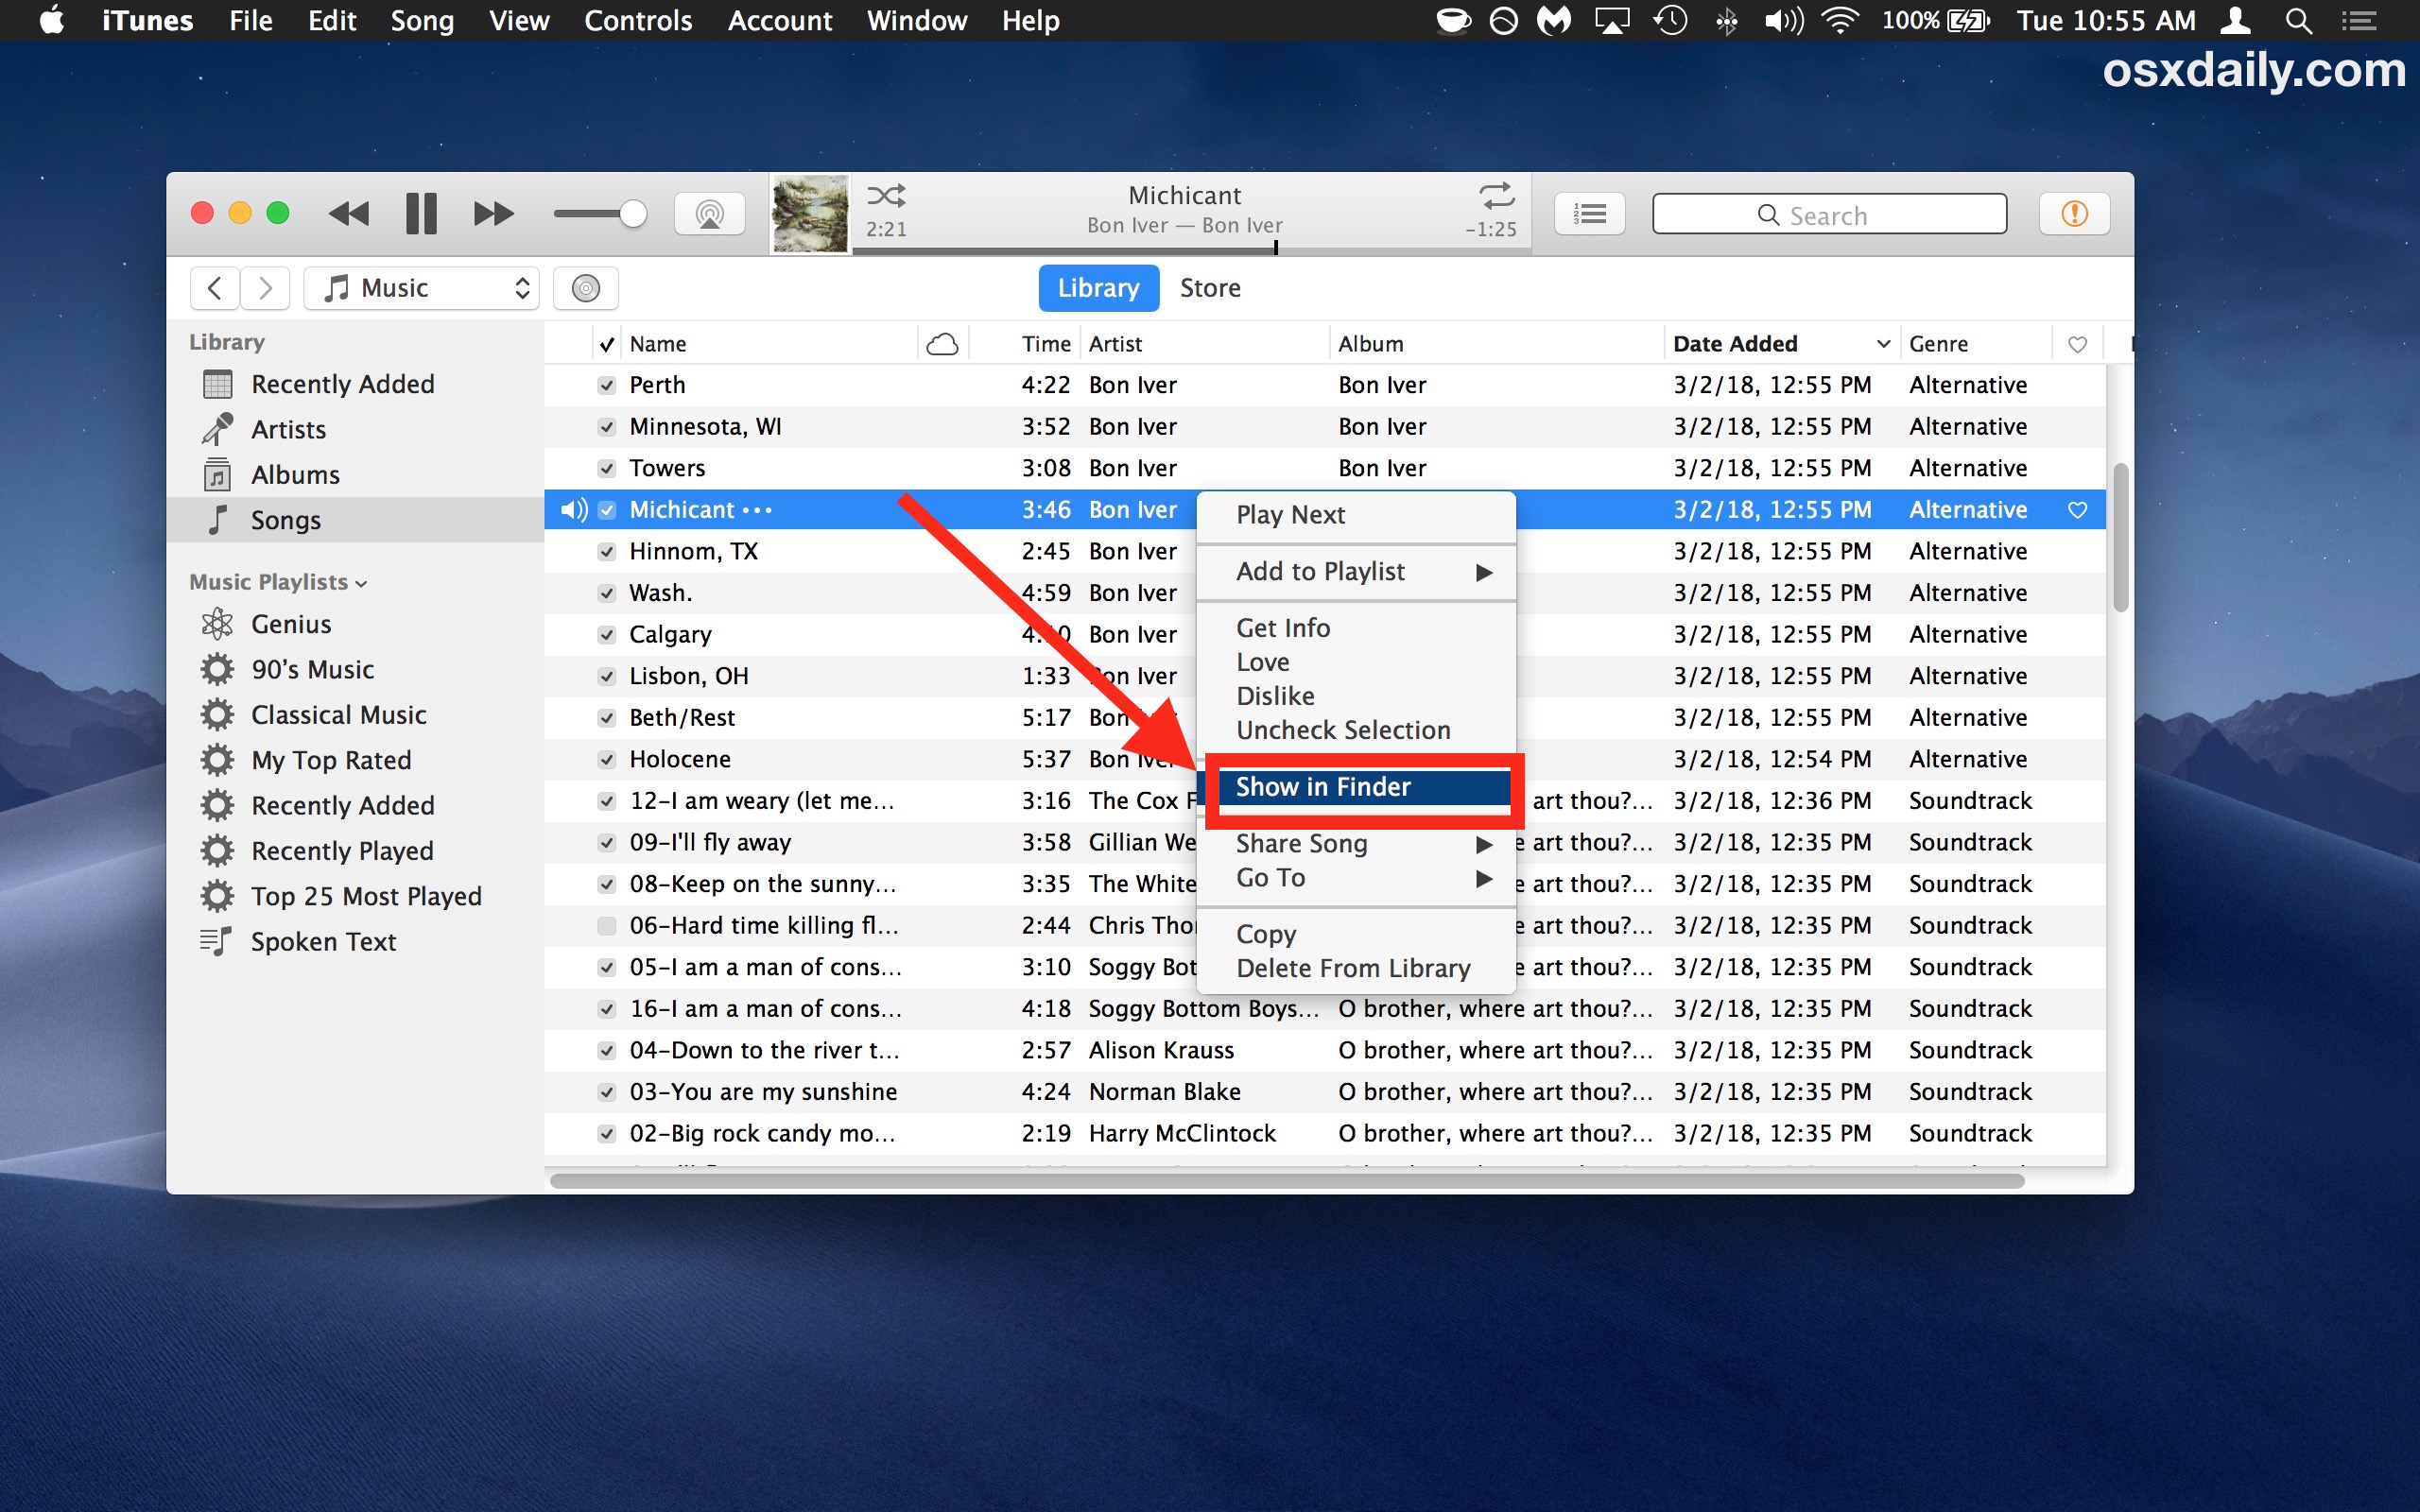 How to access audio files from iTunes quickly